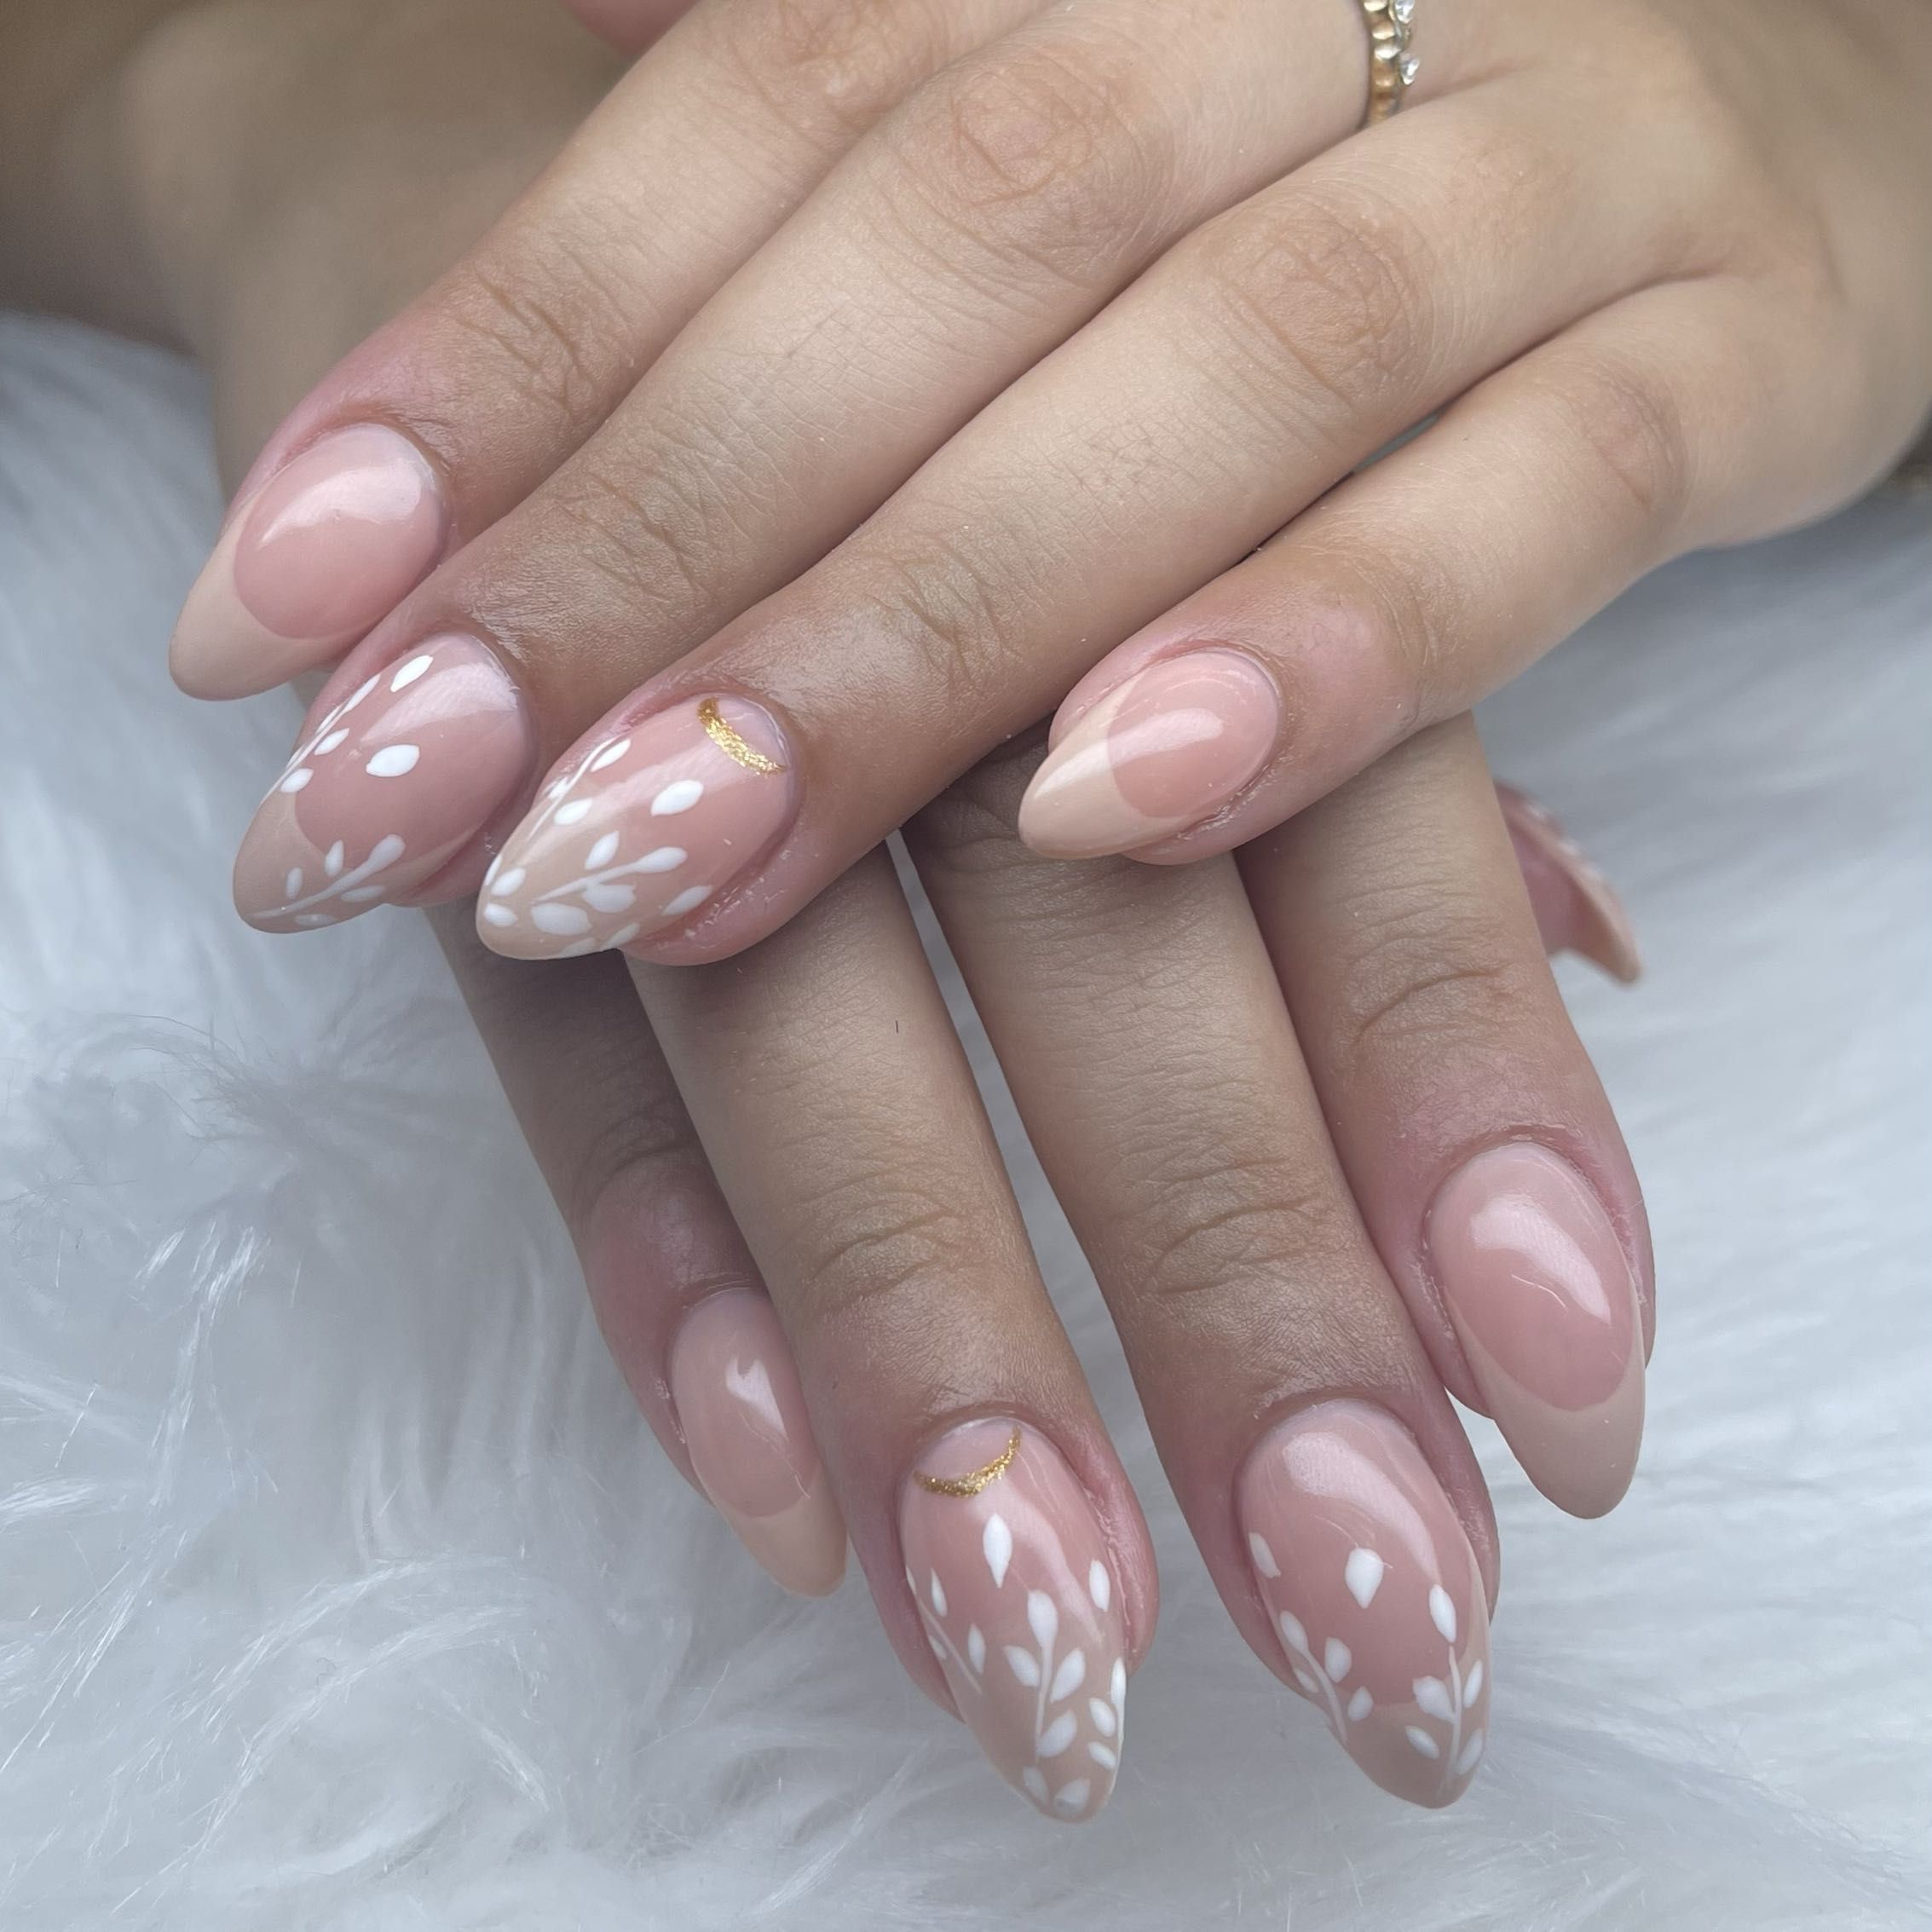 Poly gel on natural nail / design cost separate portfolio